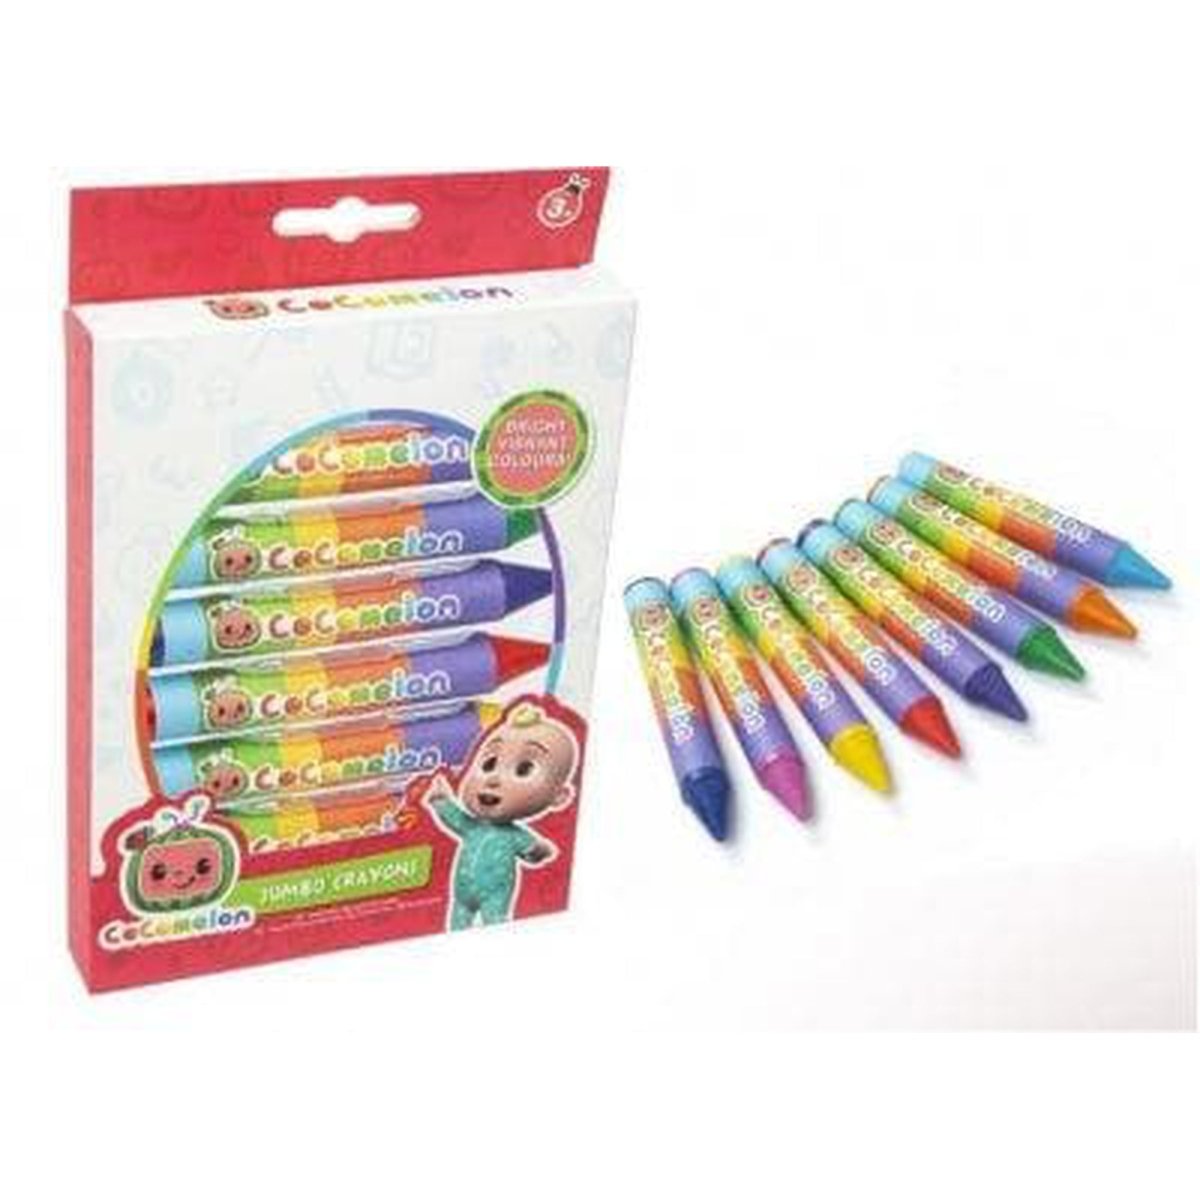 8 Pack Jumbo Cocomelon Wax Crayons - Kids Party Craft